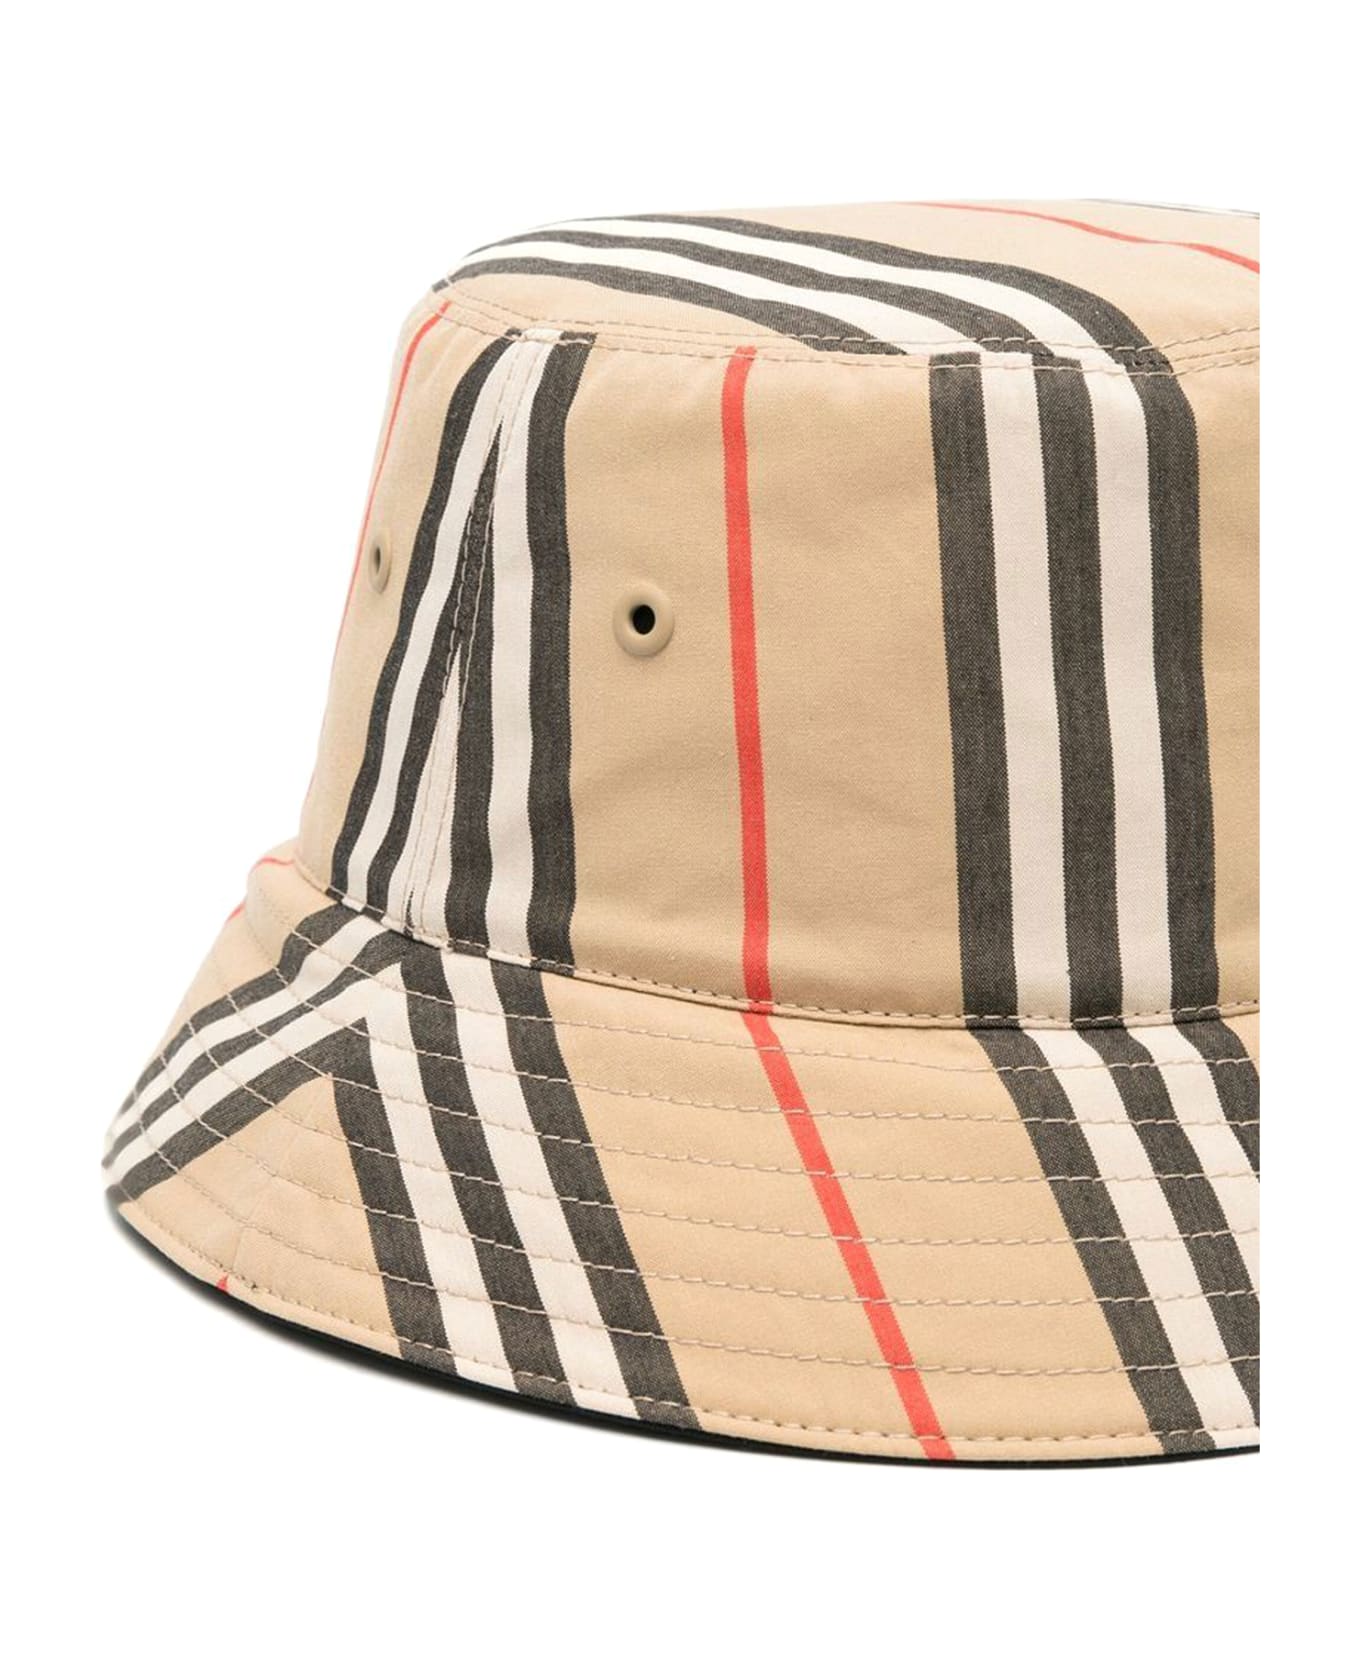 Burberry Brown Bucket Hat With Icon Stripe Motif In Cotton - Archive Beige Blck